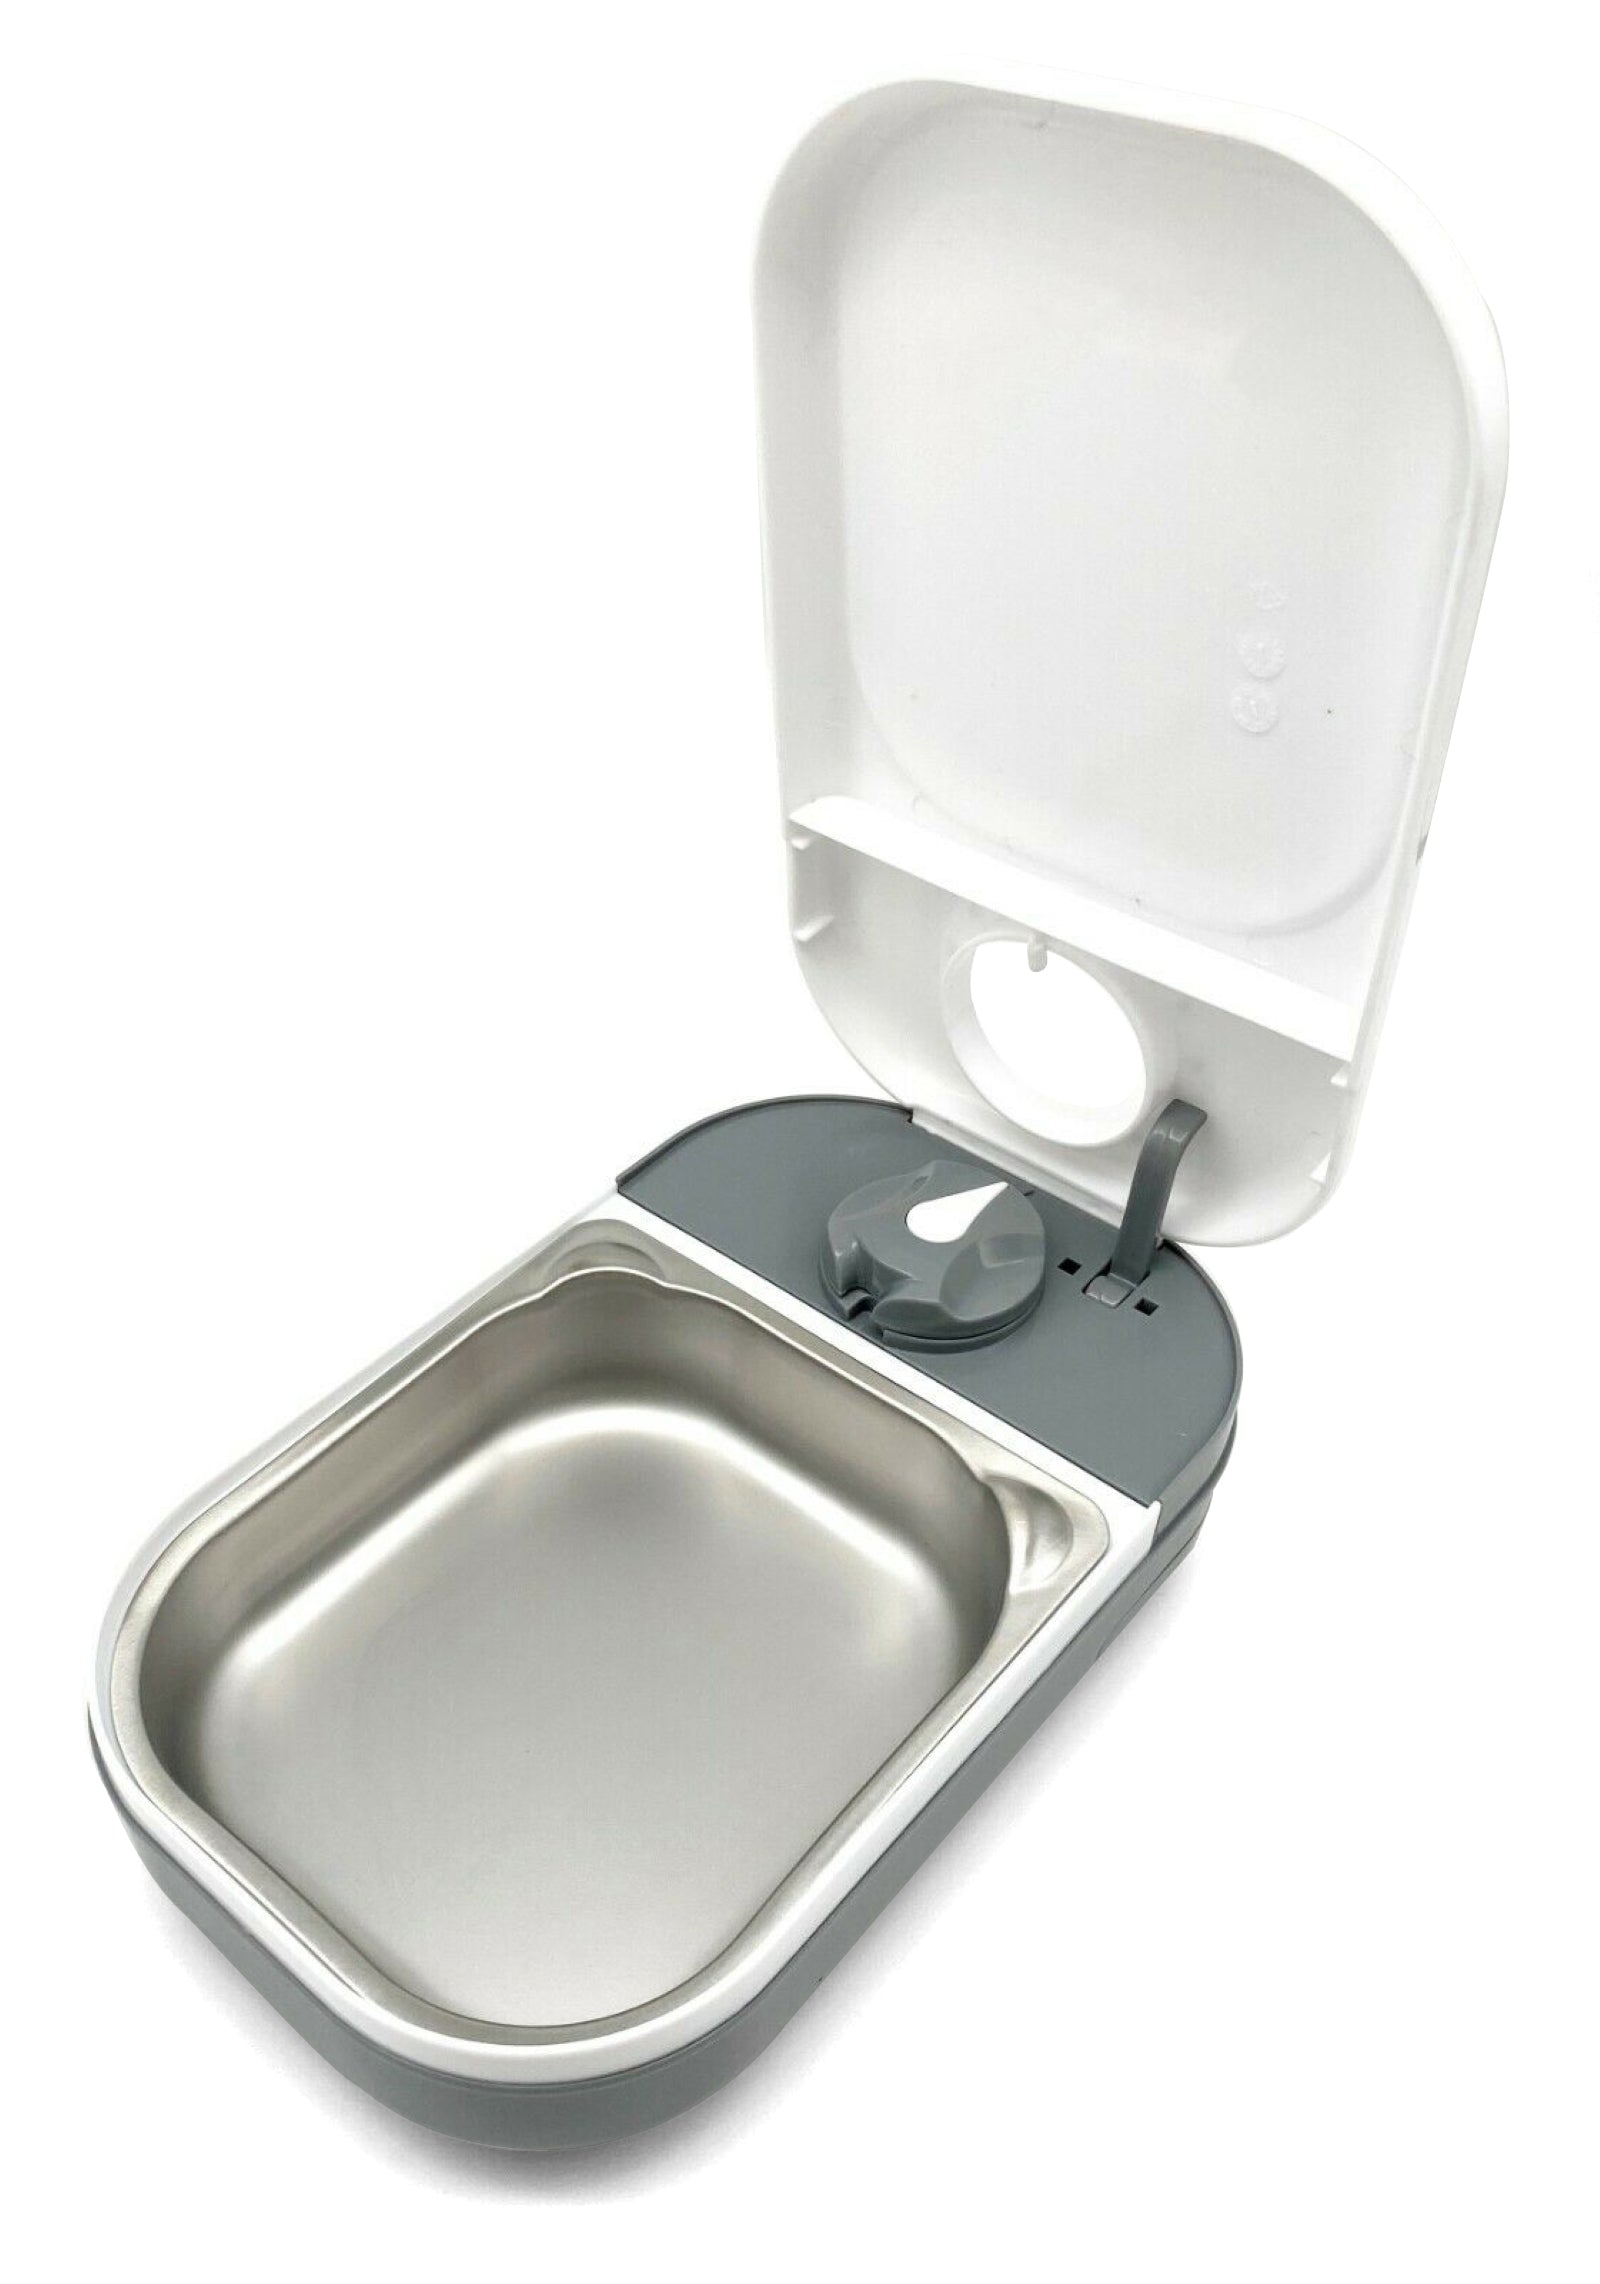 One-Meal Automatic Pet Feeder with Stainless Steel Bowl Inserts (C100)